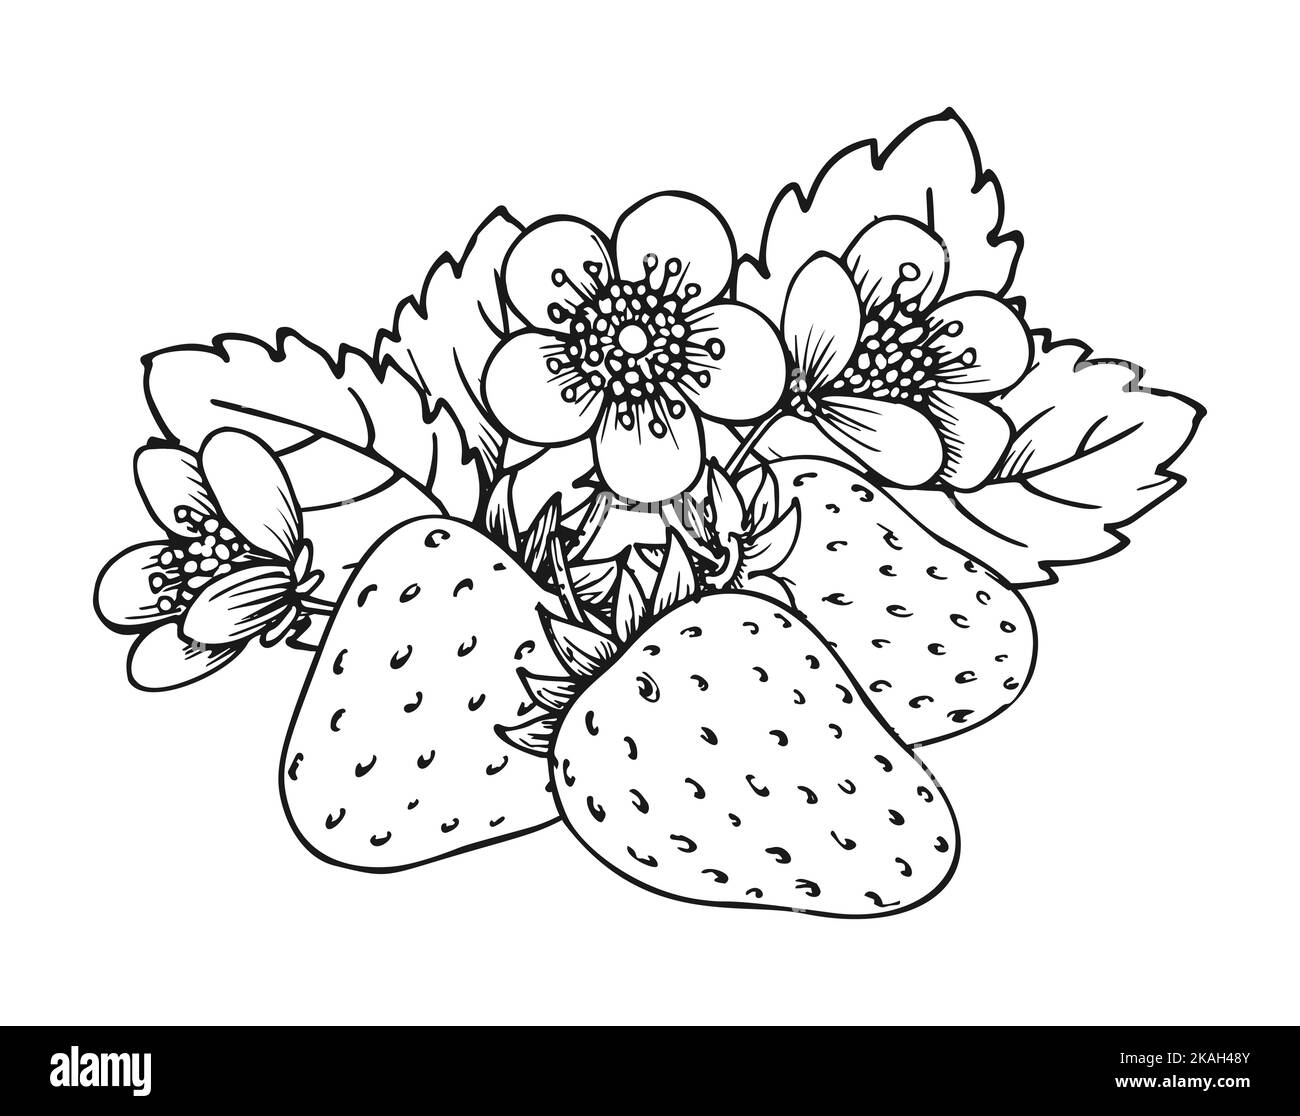 Strawberry bunch of three berries. Coloring book page. Whole ripe wild forest berry with leaves and blossom flowers. Tasty sweet fresh fruit. Juicy strawberries handdrawn clip art black white sketch Stock Vector